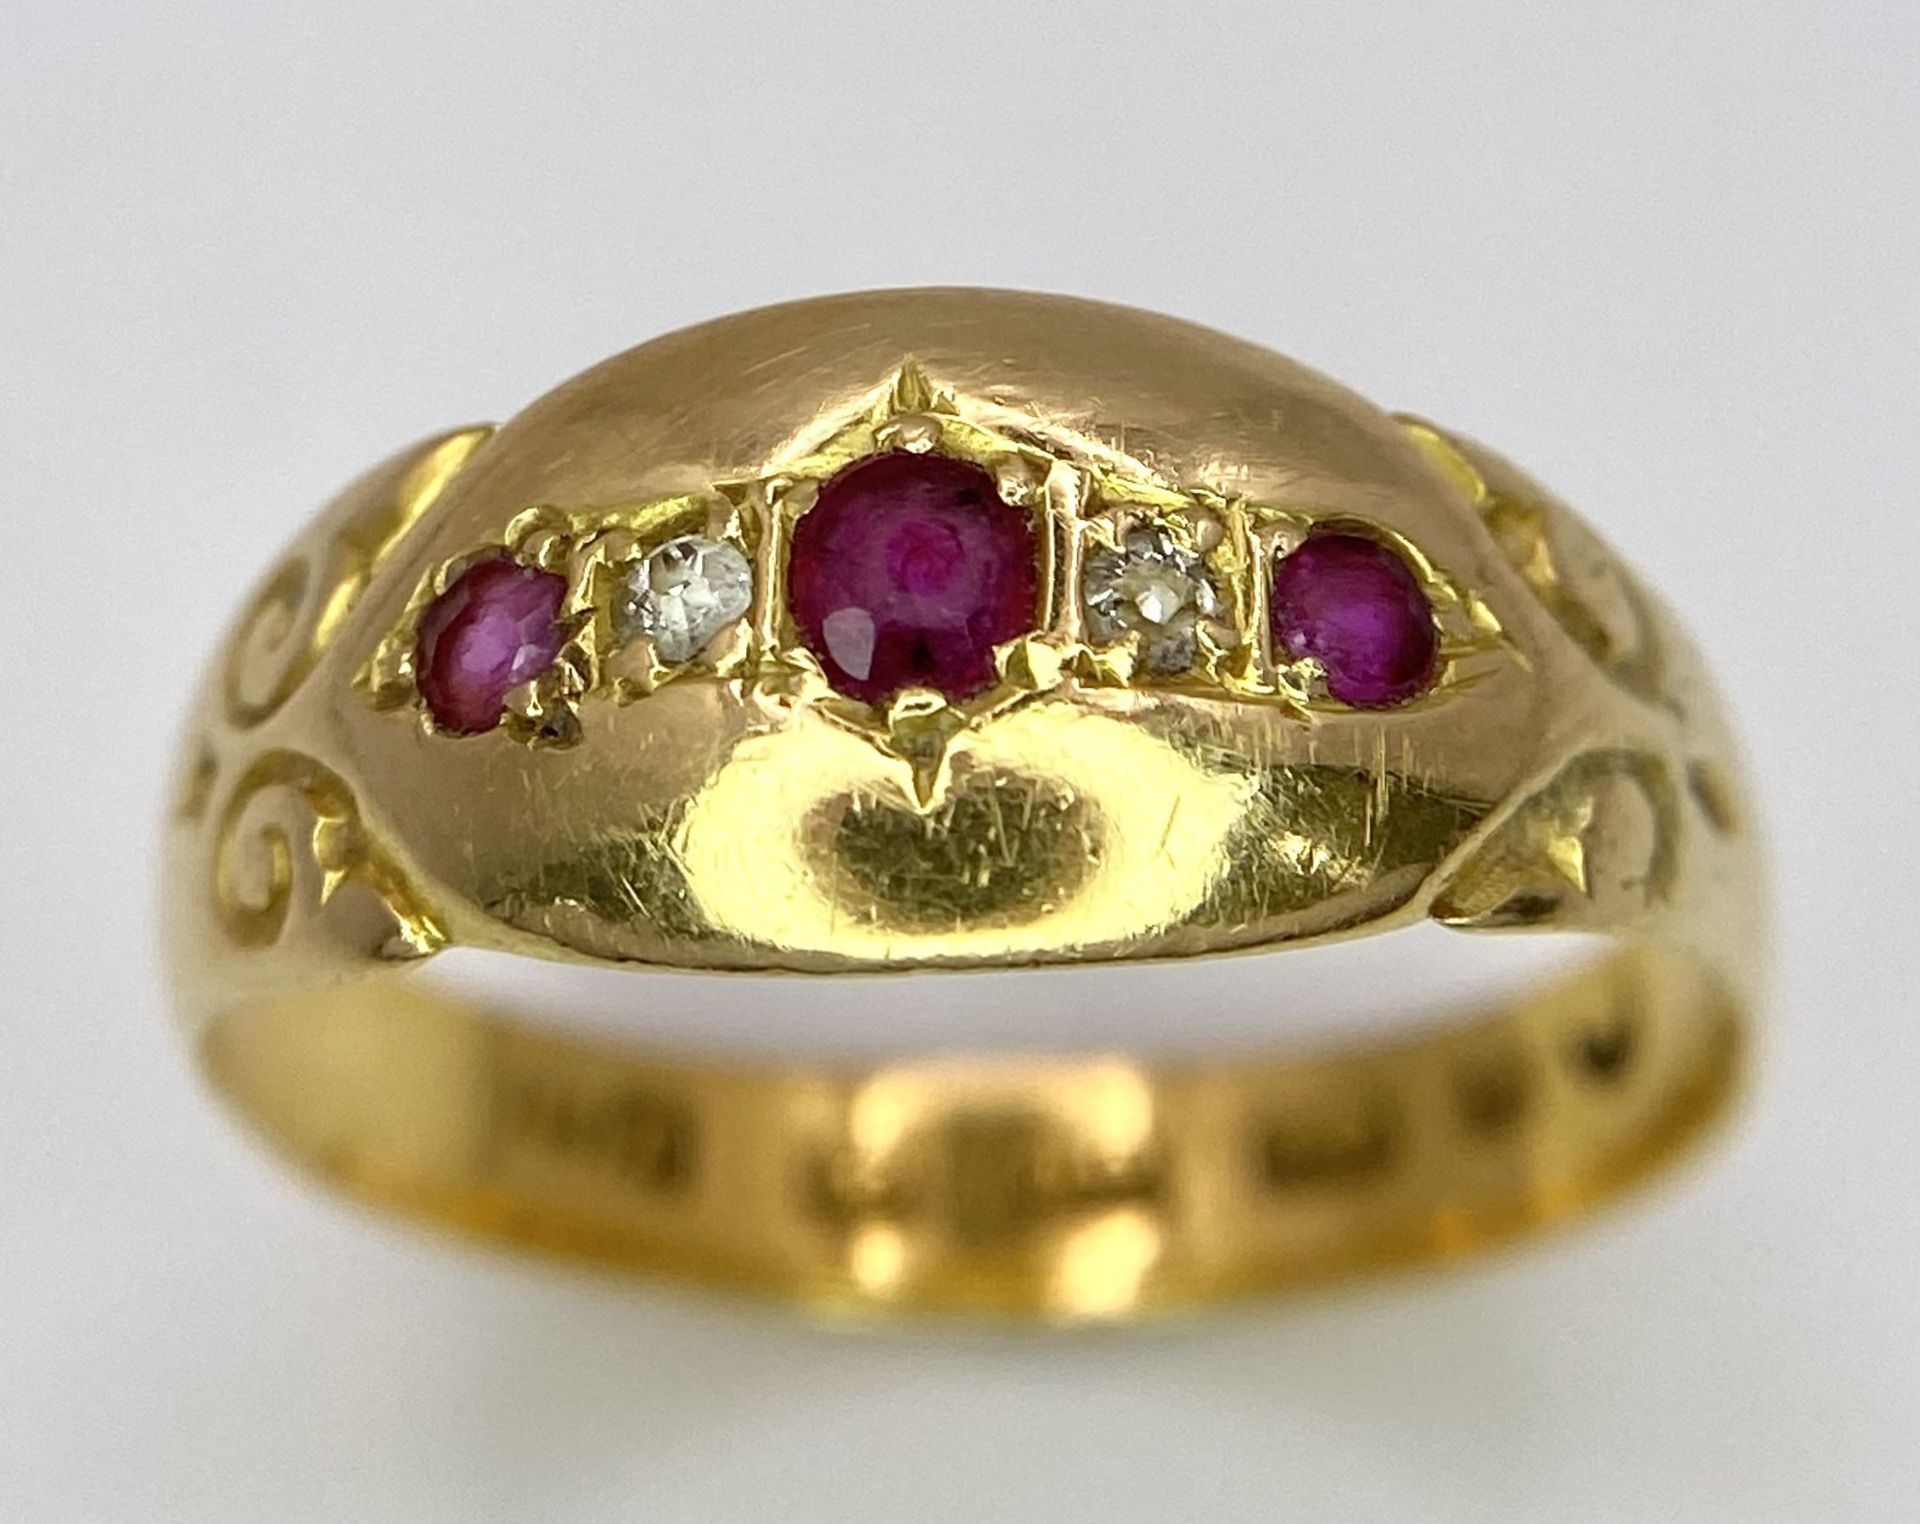 An Antique 22K Yellow Gold Ruby and Diamond Ring. Size M. 2.6g total weight.